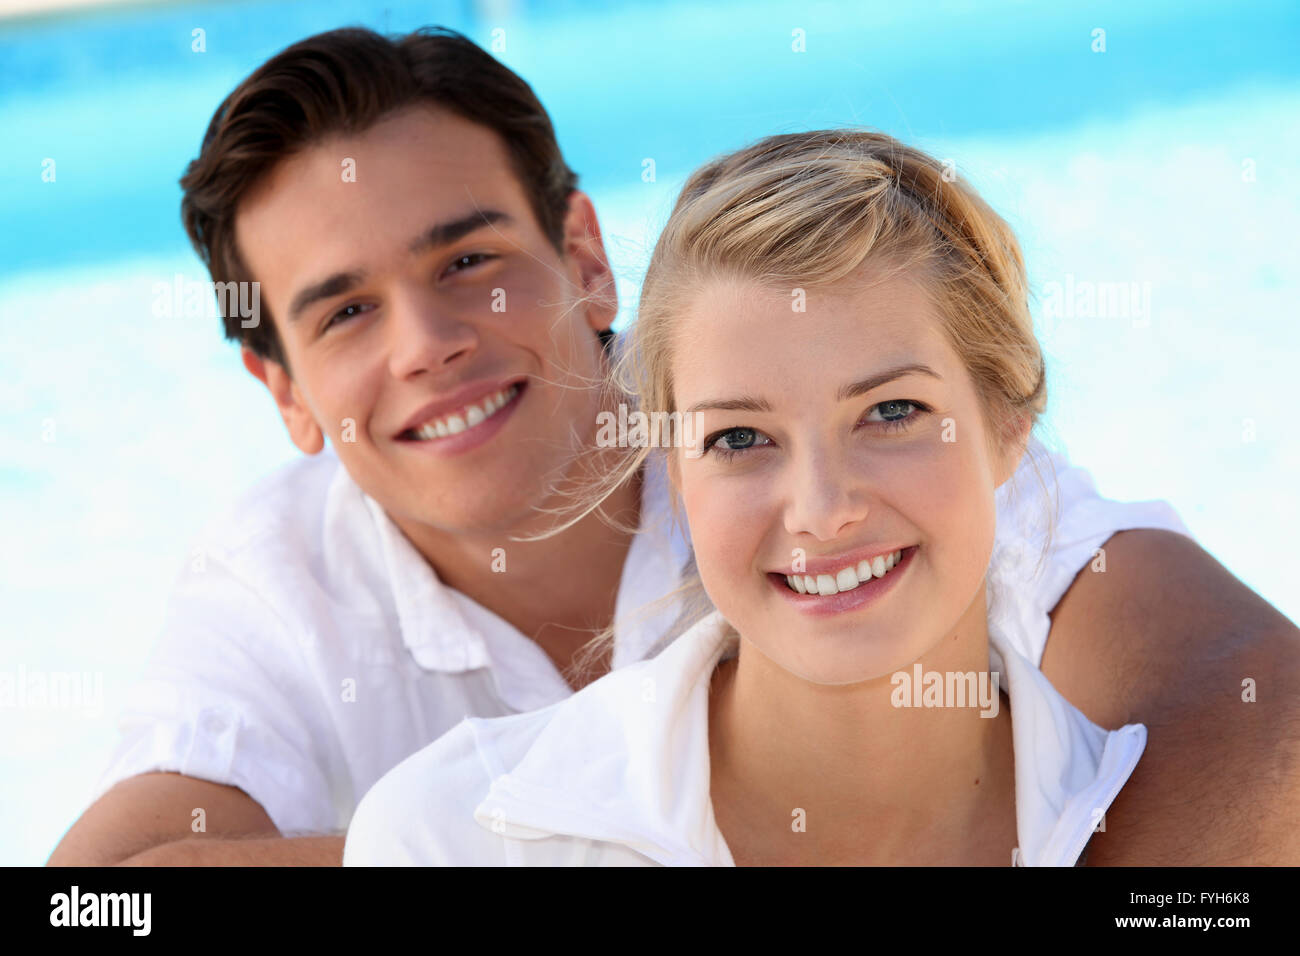 Smiling young couple with a blue sky background Stock Photo